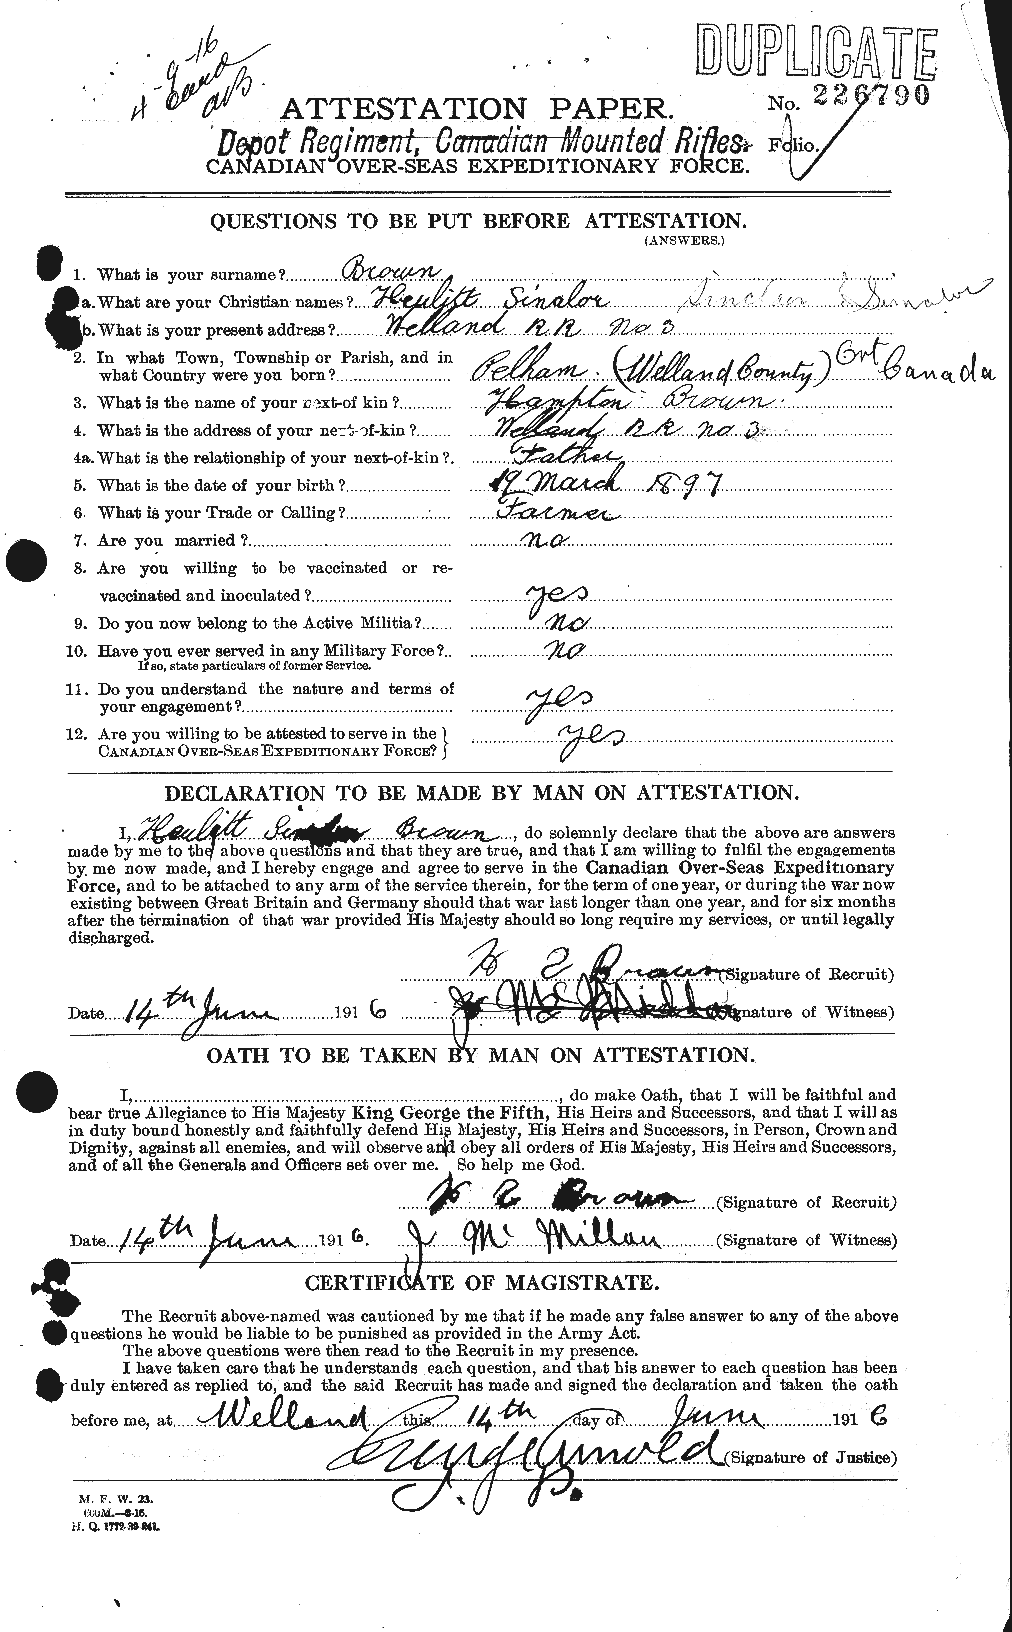 Personnel Records of the First World War - CEF 265600a